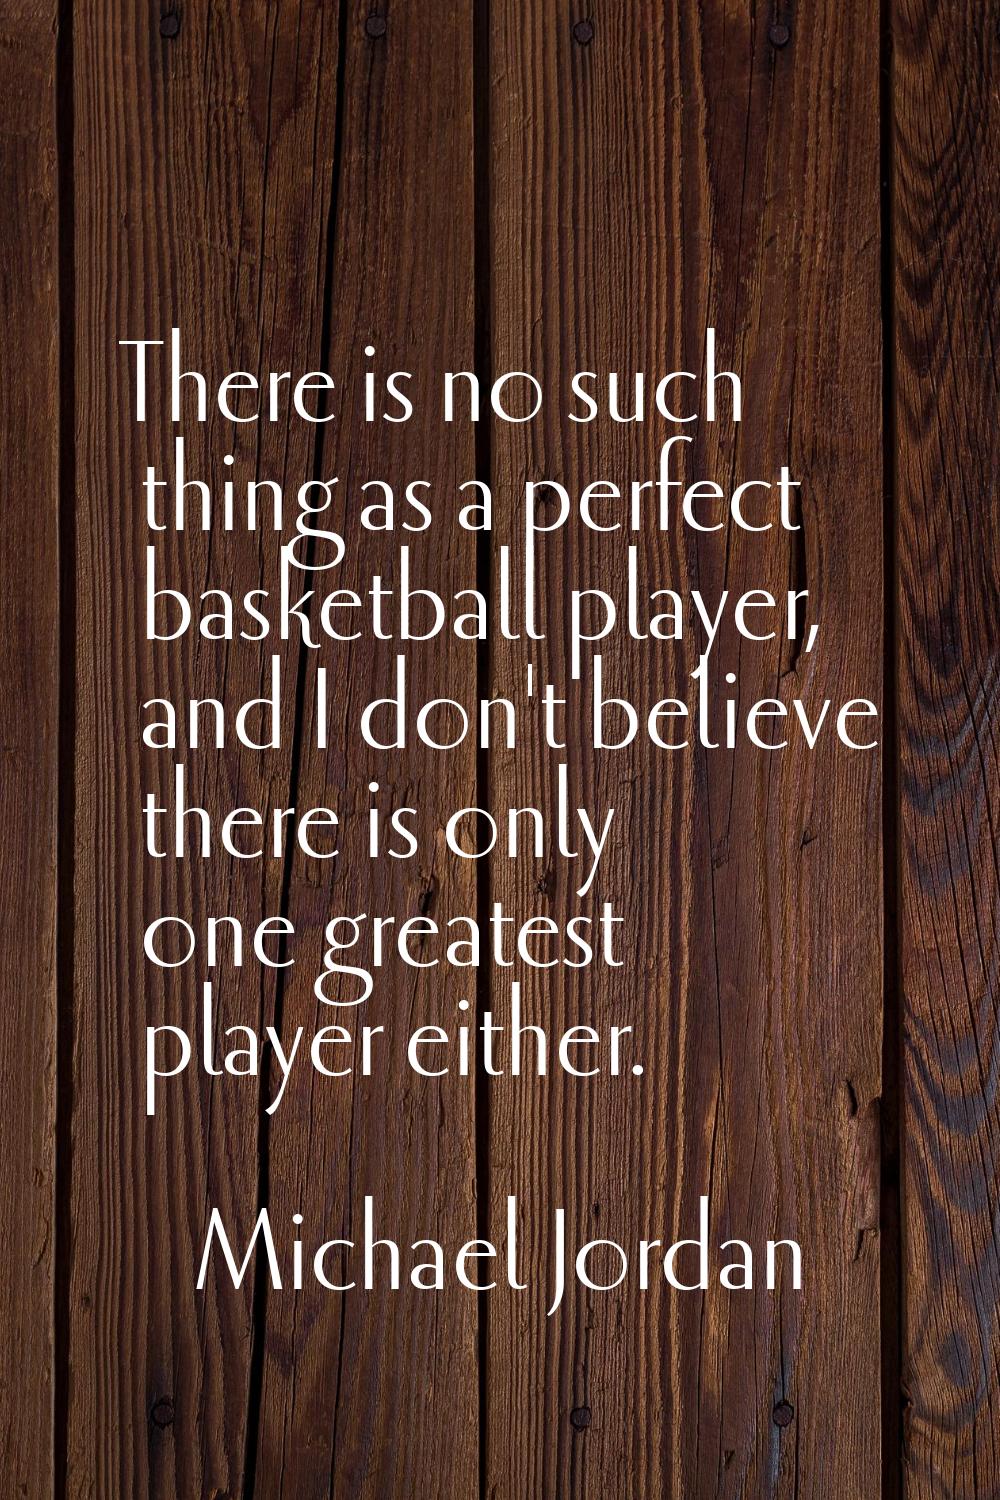 There is no such thing as a perfect basketball player, and I don't believe there is only one greate